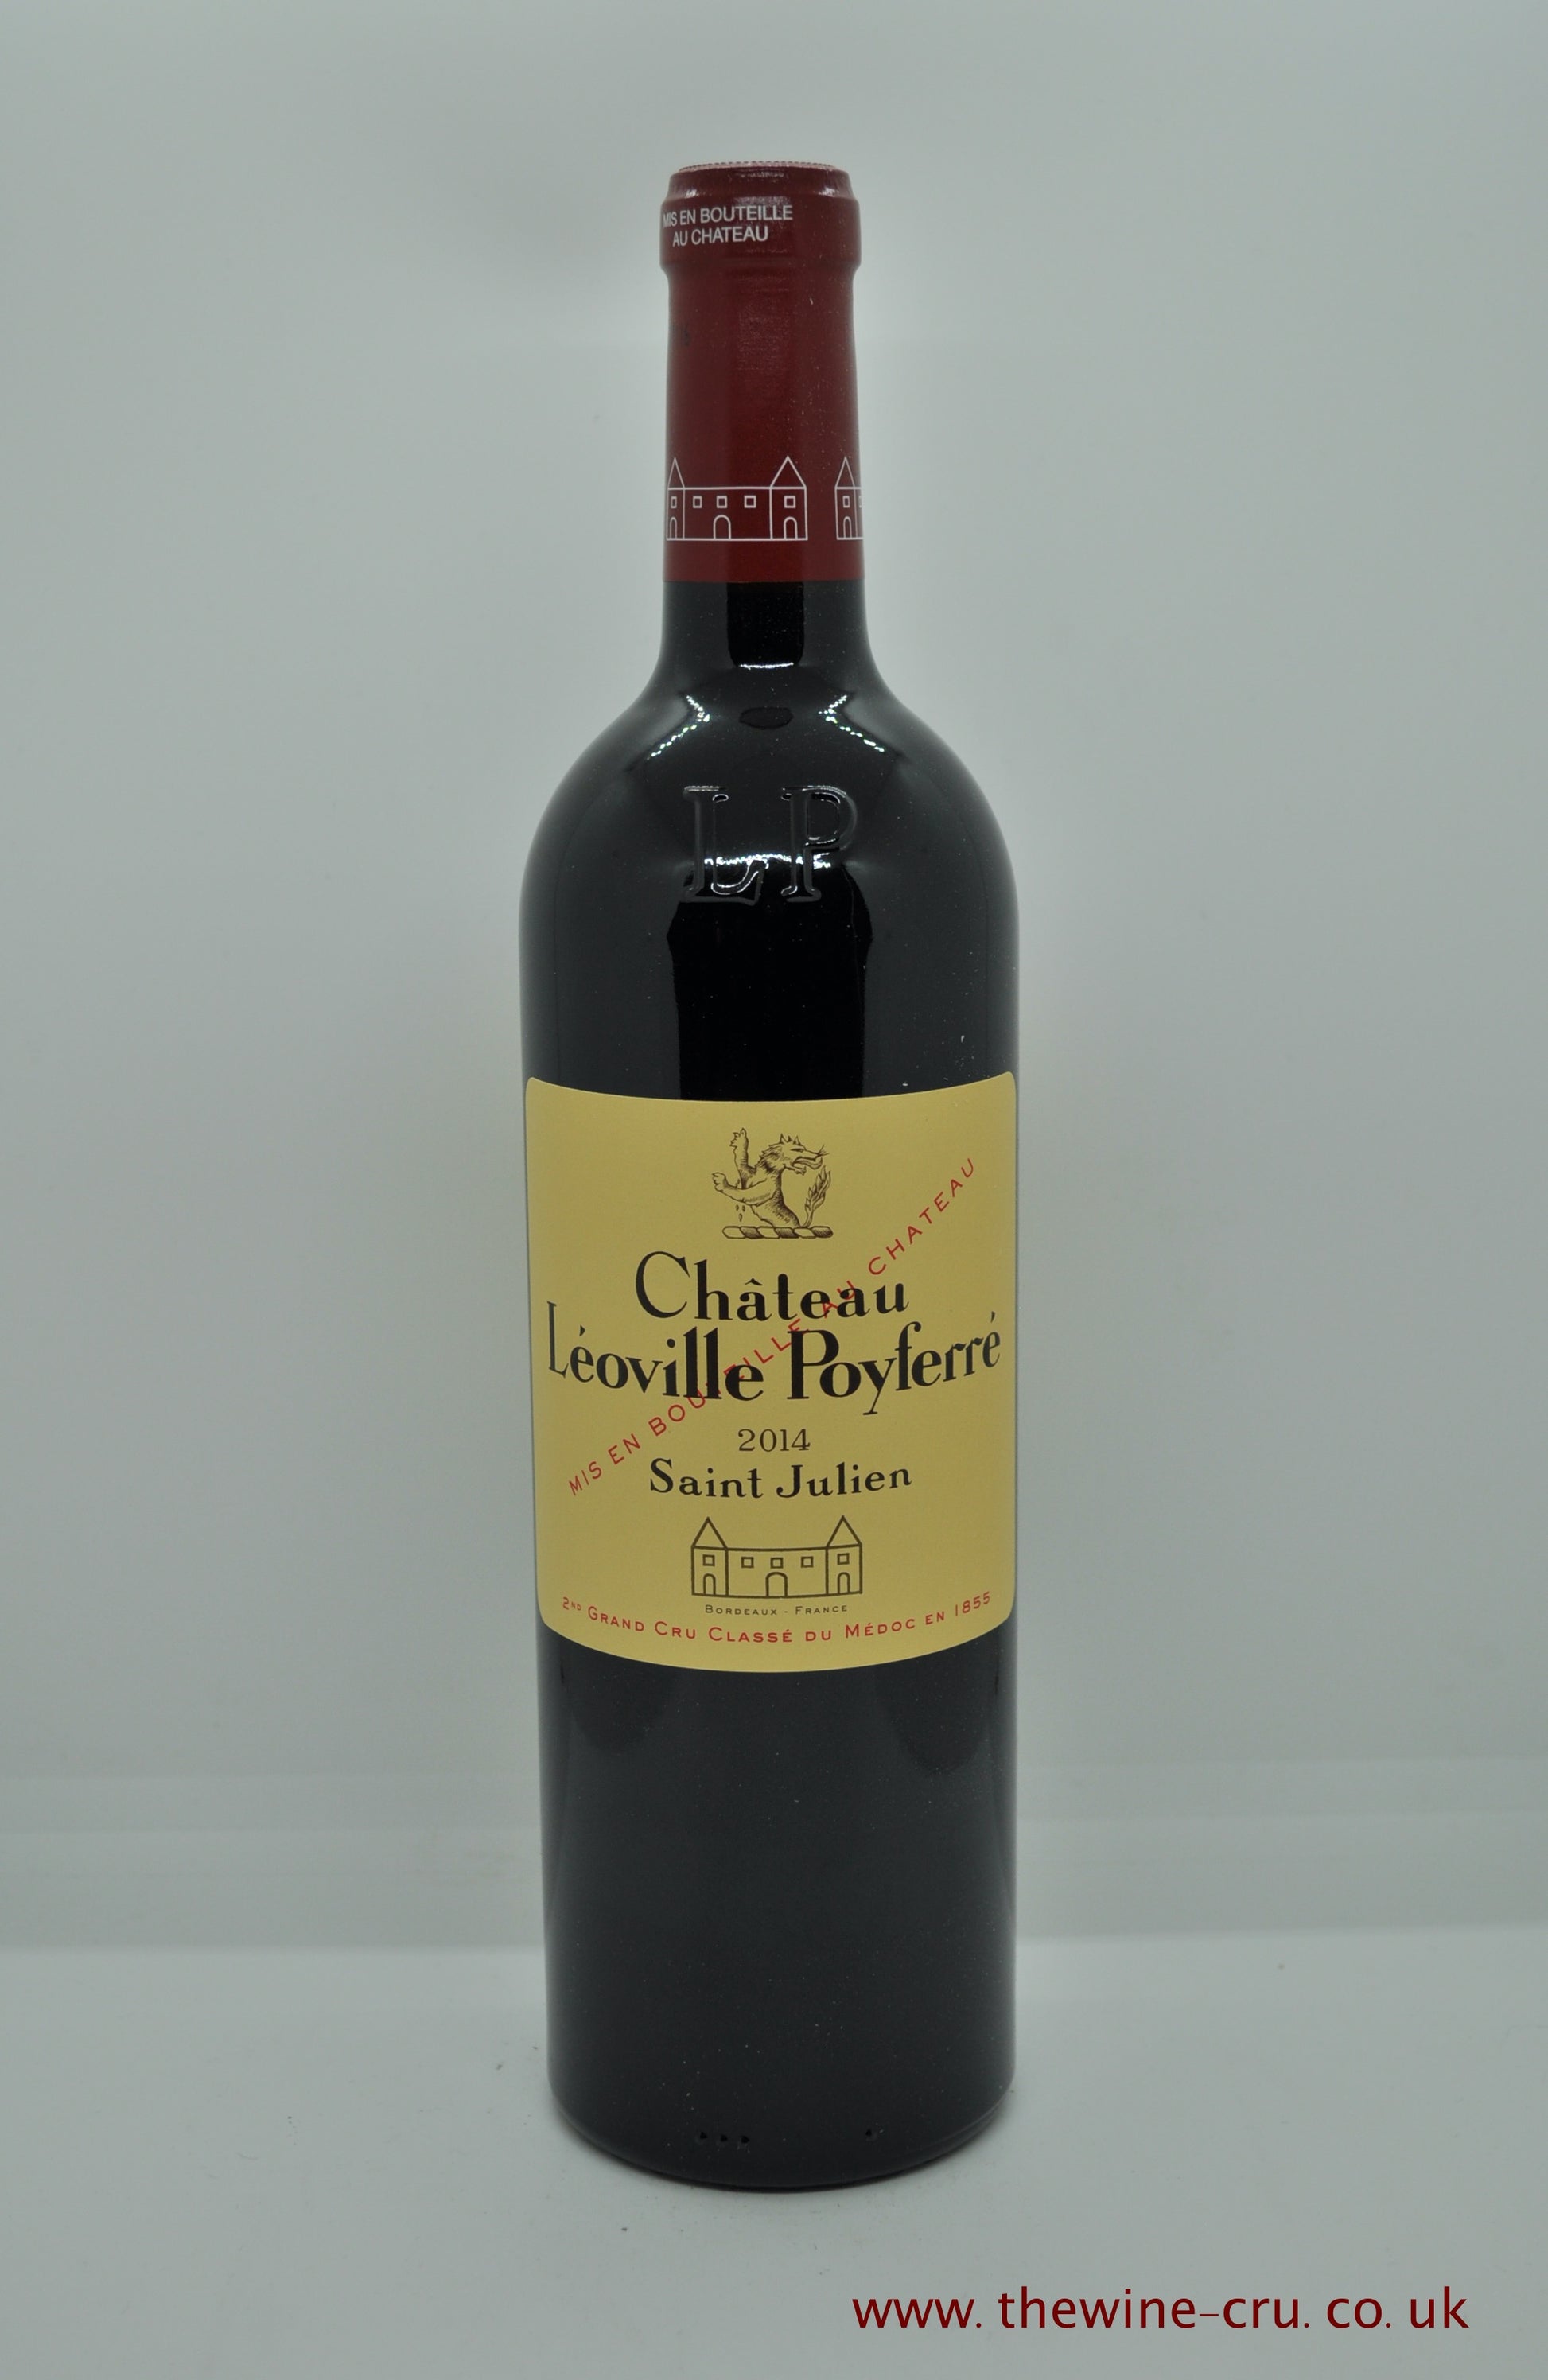 2014 vintage red wine. Chateau Leoville Poyferre 2014. France, Bordeaux. Immediate delivery. Free local delivery. Gift wrapping available.